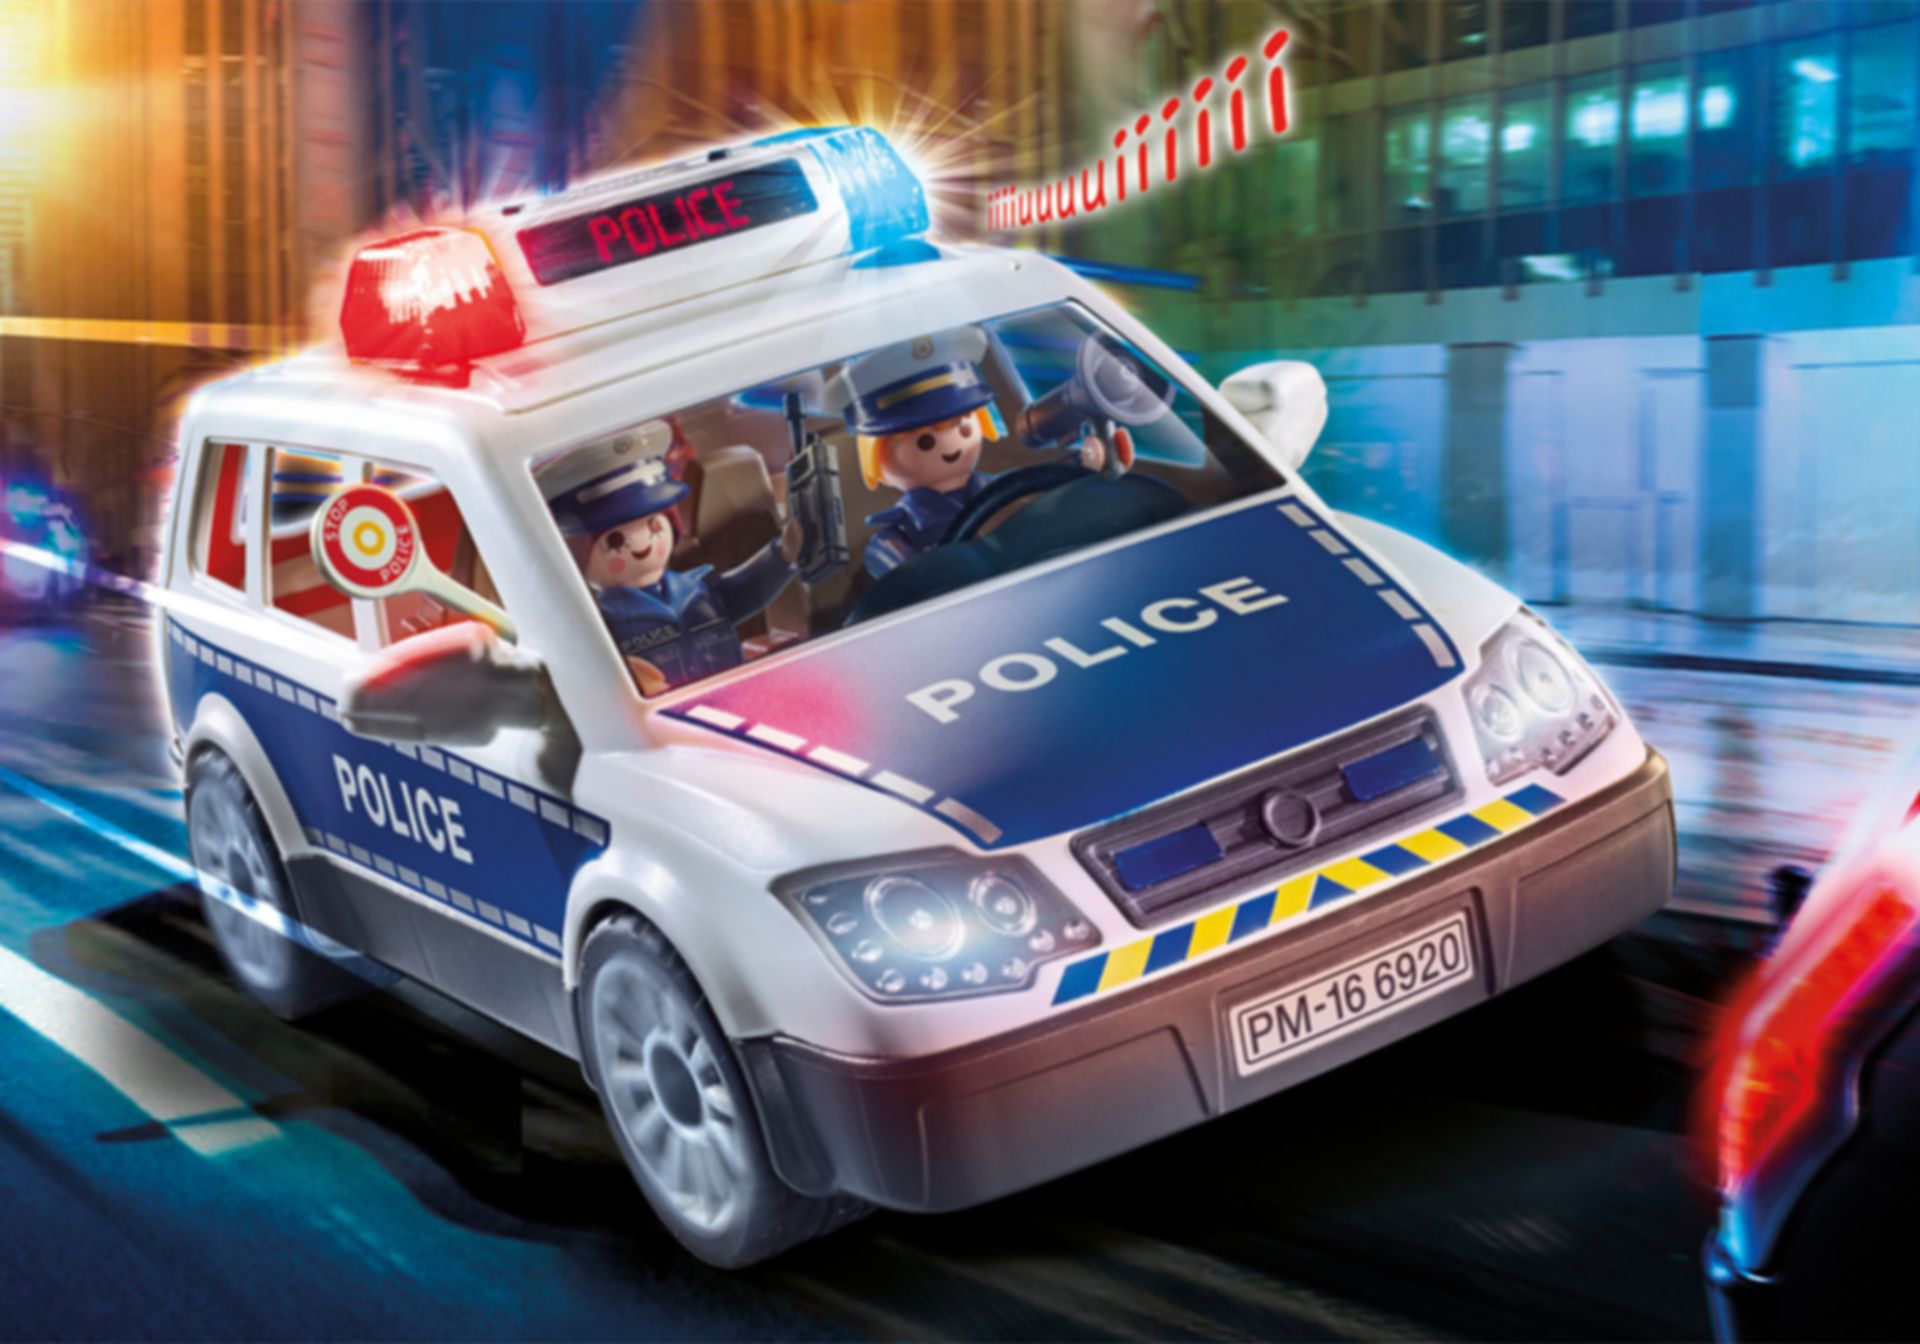 Playmobil® City Action Squad Car with Lights and Sound